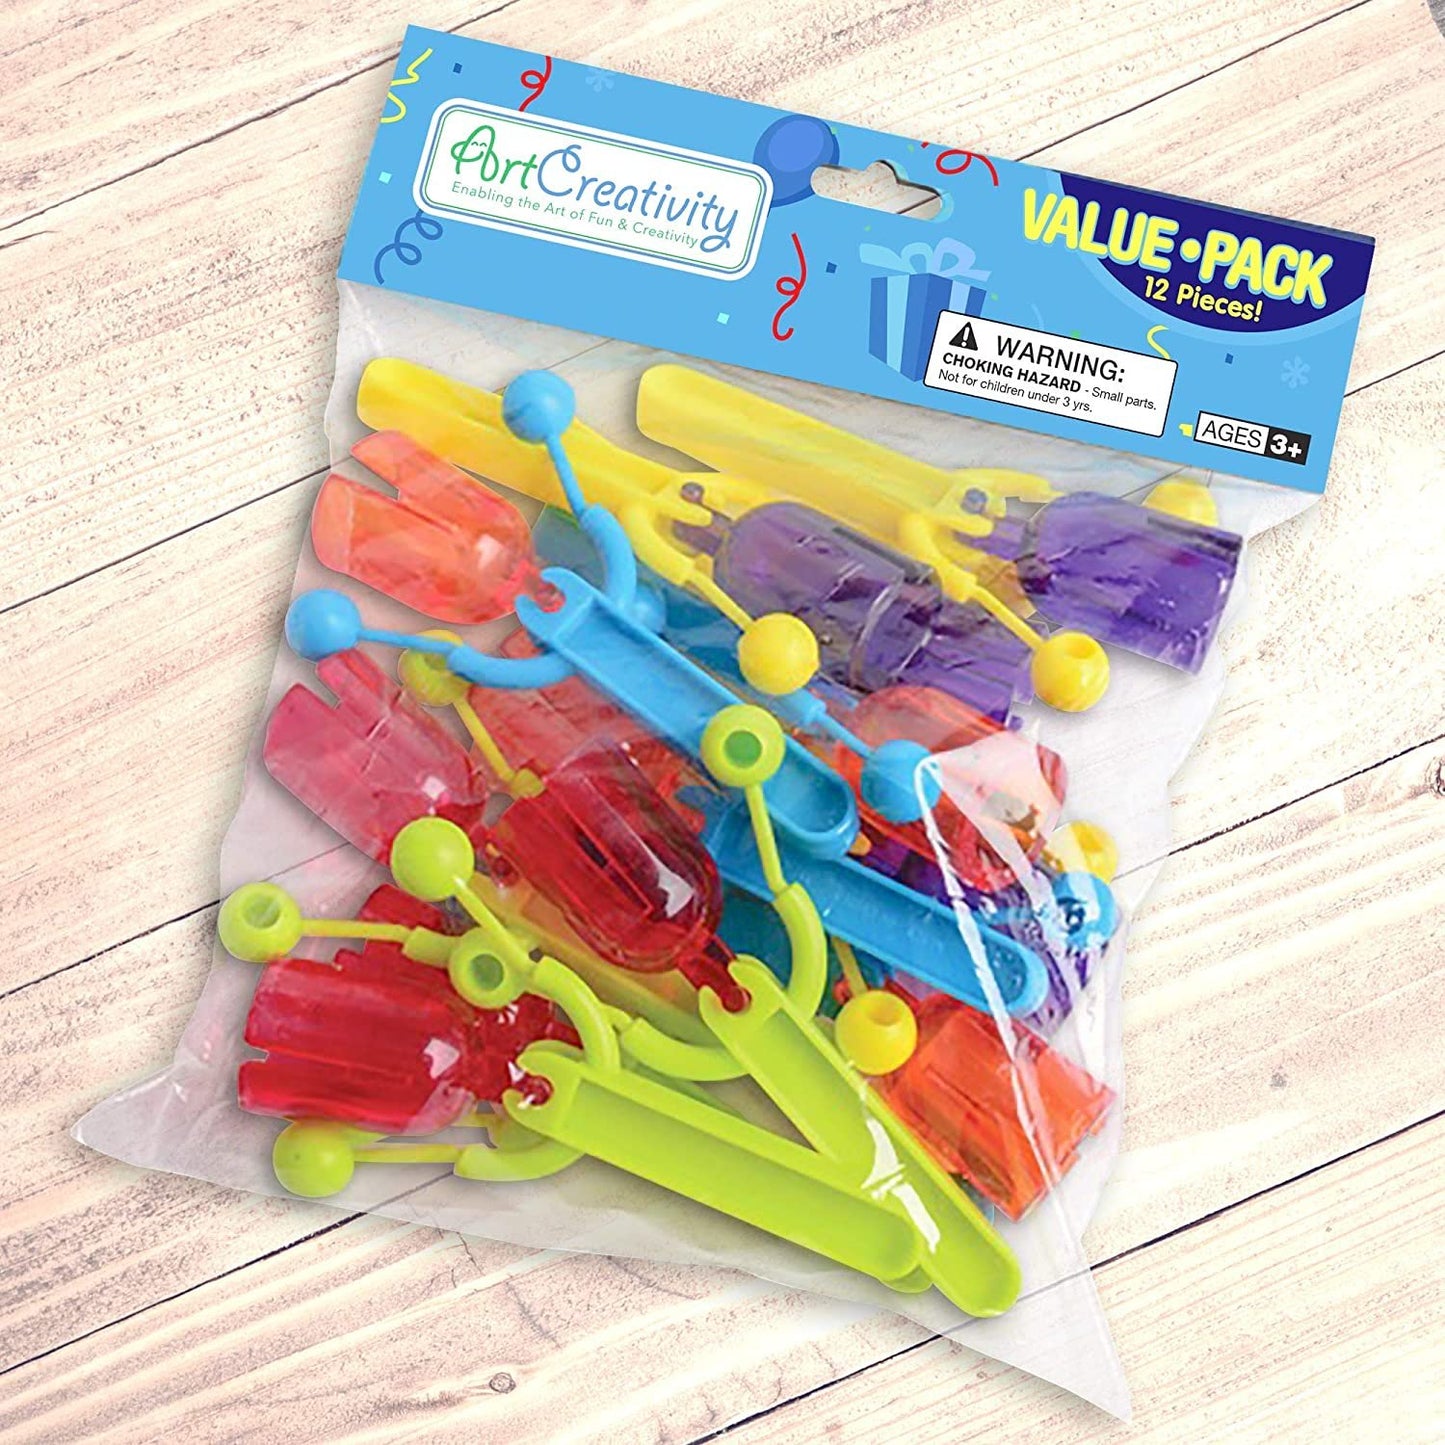 ArtCreativity Bell Clackers Noise Makers for Kids - Set of 12 - Click Clacks - Durable Plastic Noisemakers - Unique Birthday Party Favors for Kids, Colorful Goody Bag Fillers, Fun Stocking Stuffers